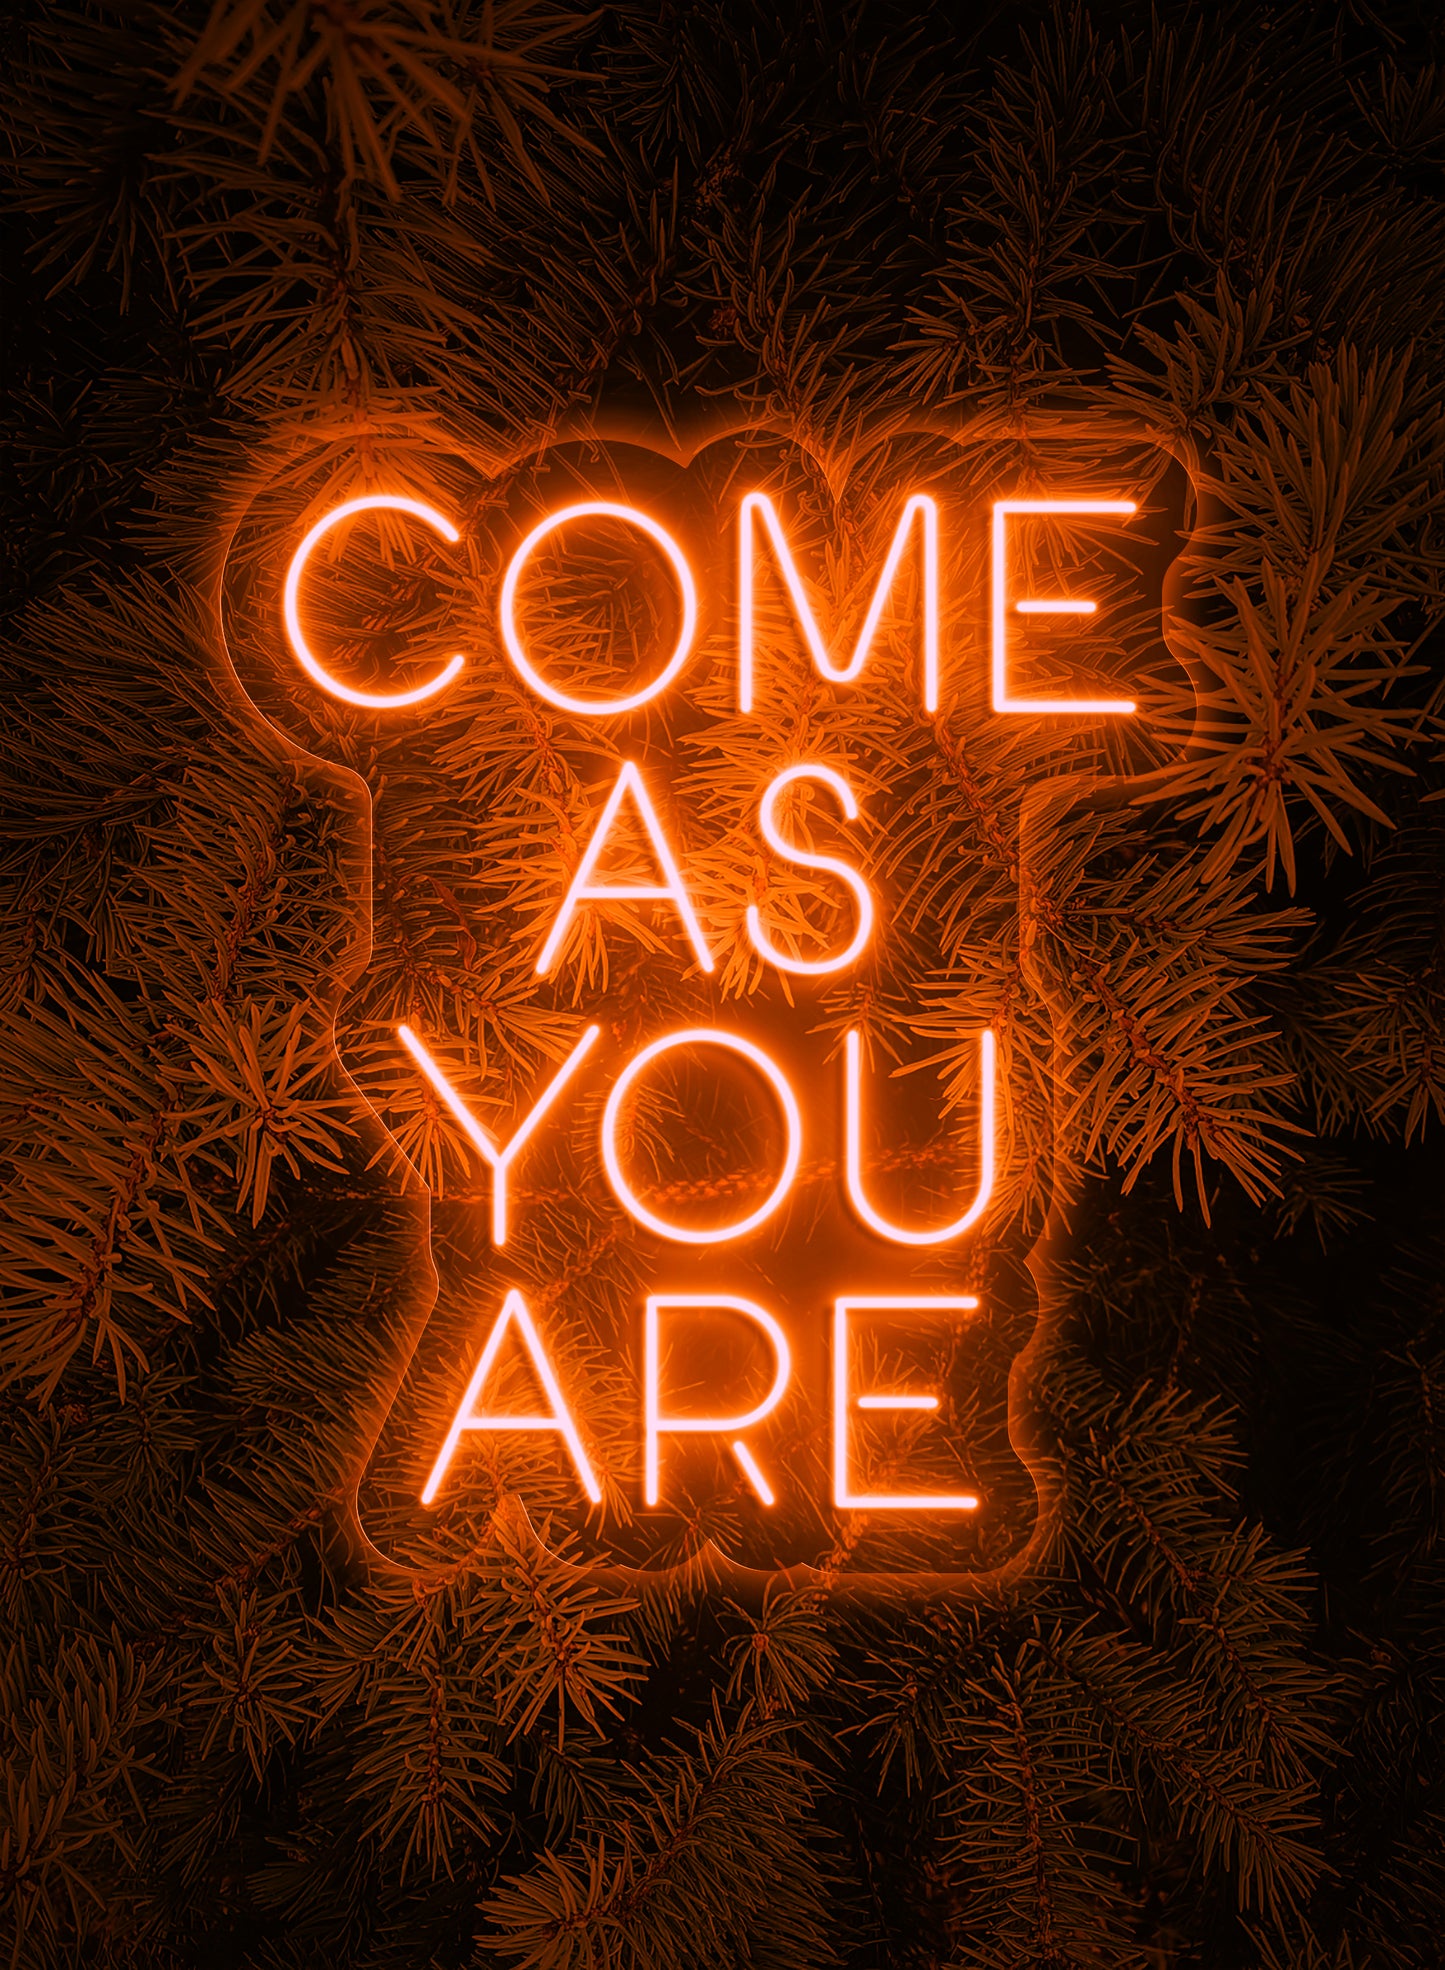 Come as you are